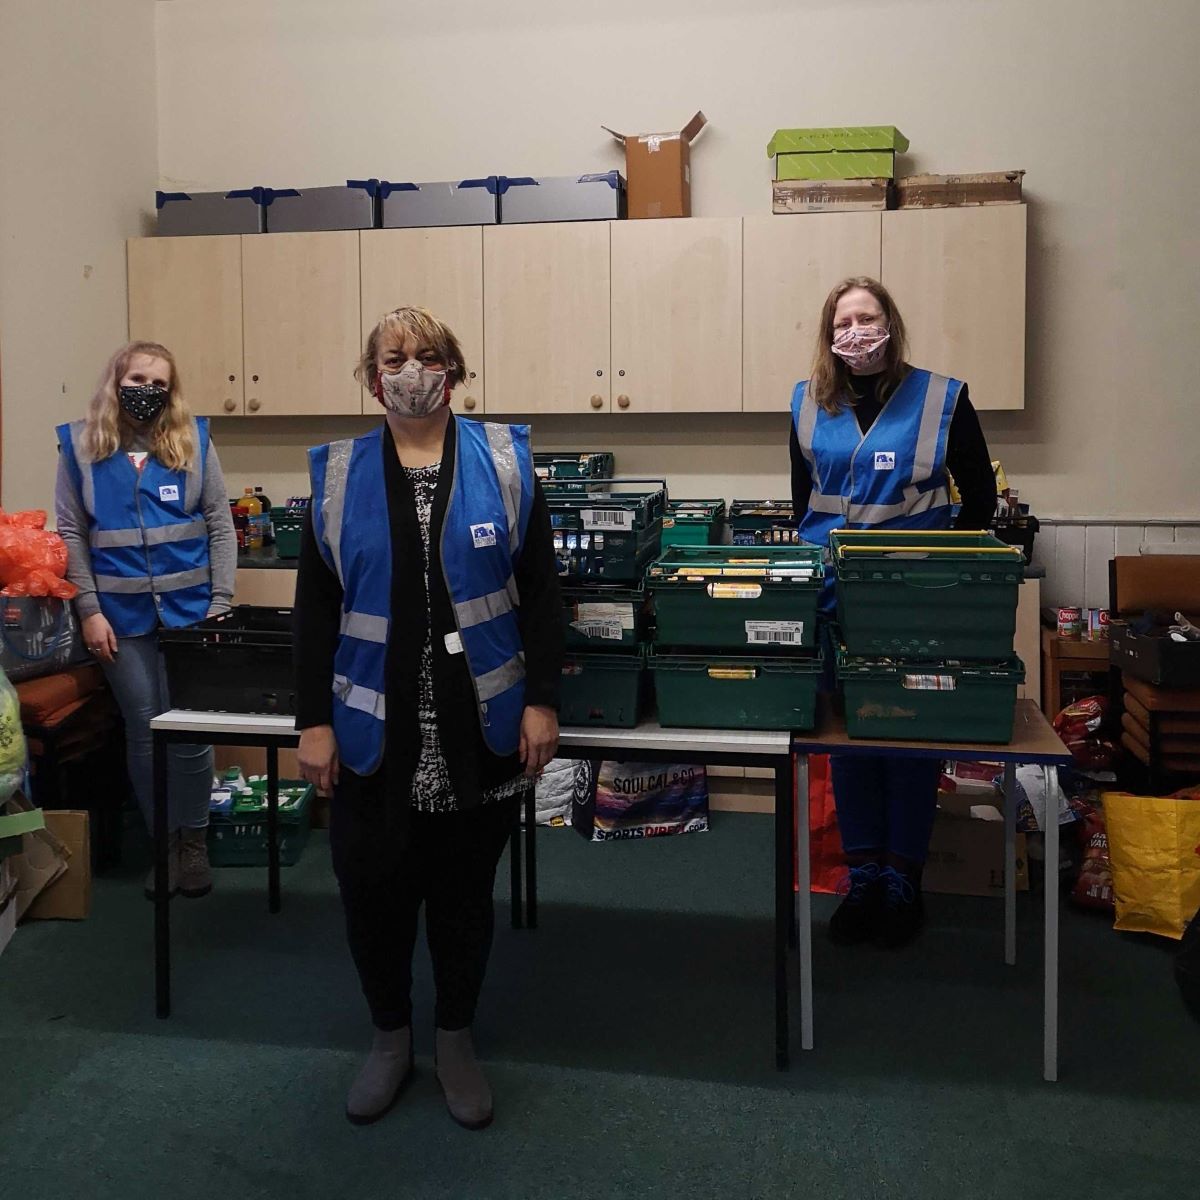 Experience: being part of Southampton Coronavirus Mutual Aid Group showed the strength of community action